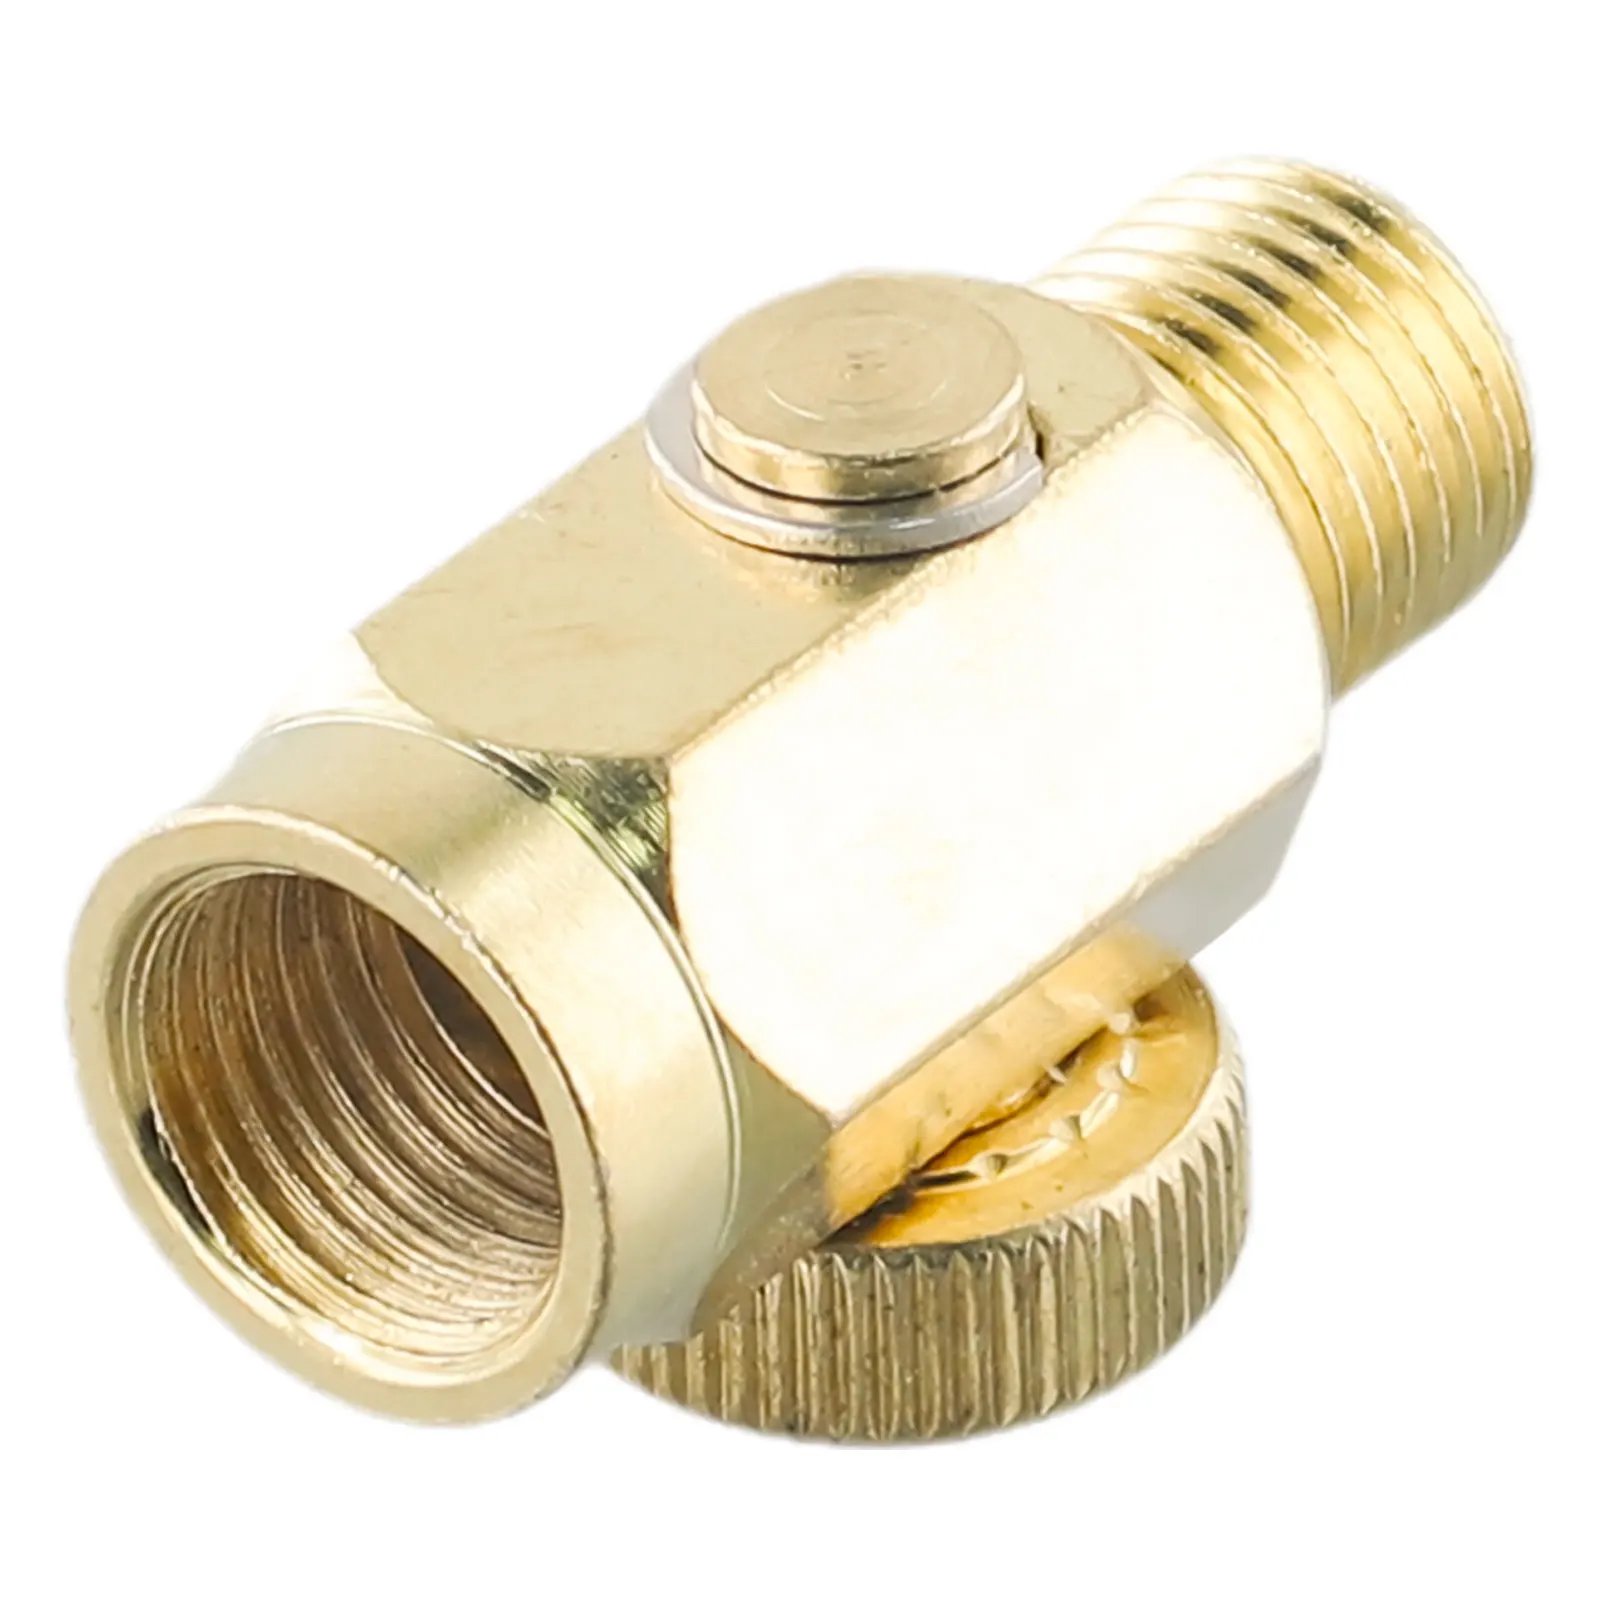 

High Quality Solid Brass Compressed Air Pressure Valve Tool with 1/4 NPT Threads 4PCS 1/4 NPT Inline Regulator